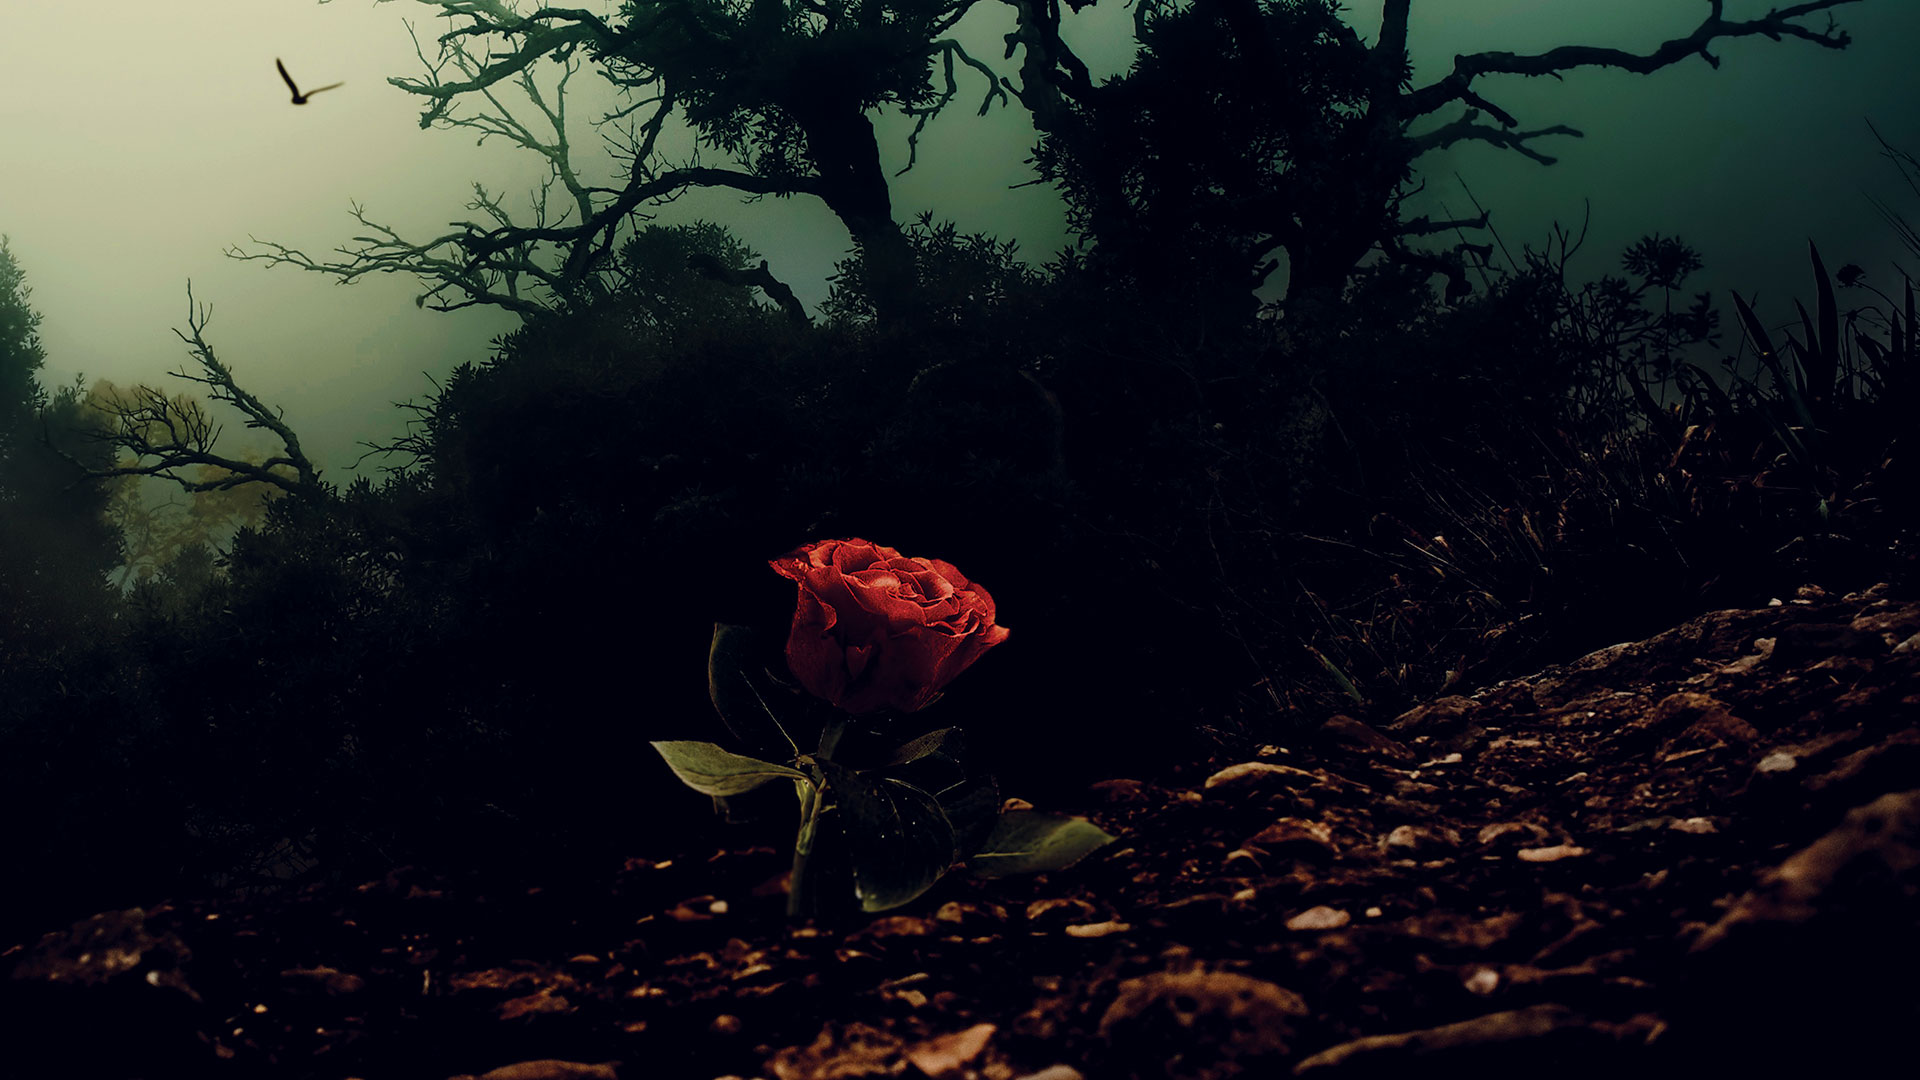 Red rose growing through soil against spooky tree